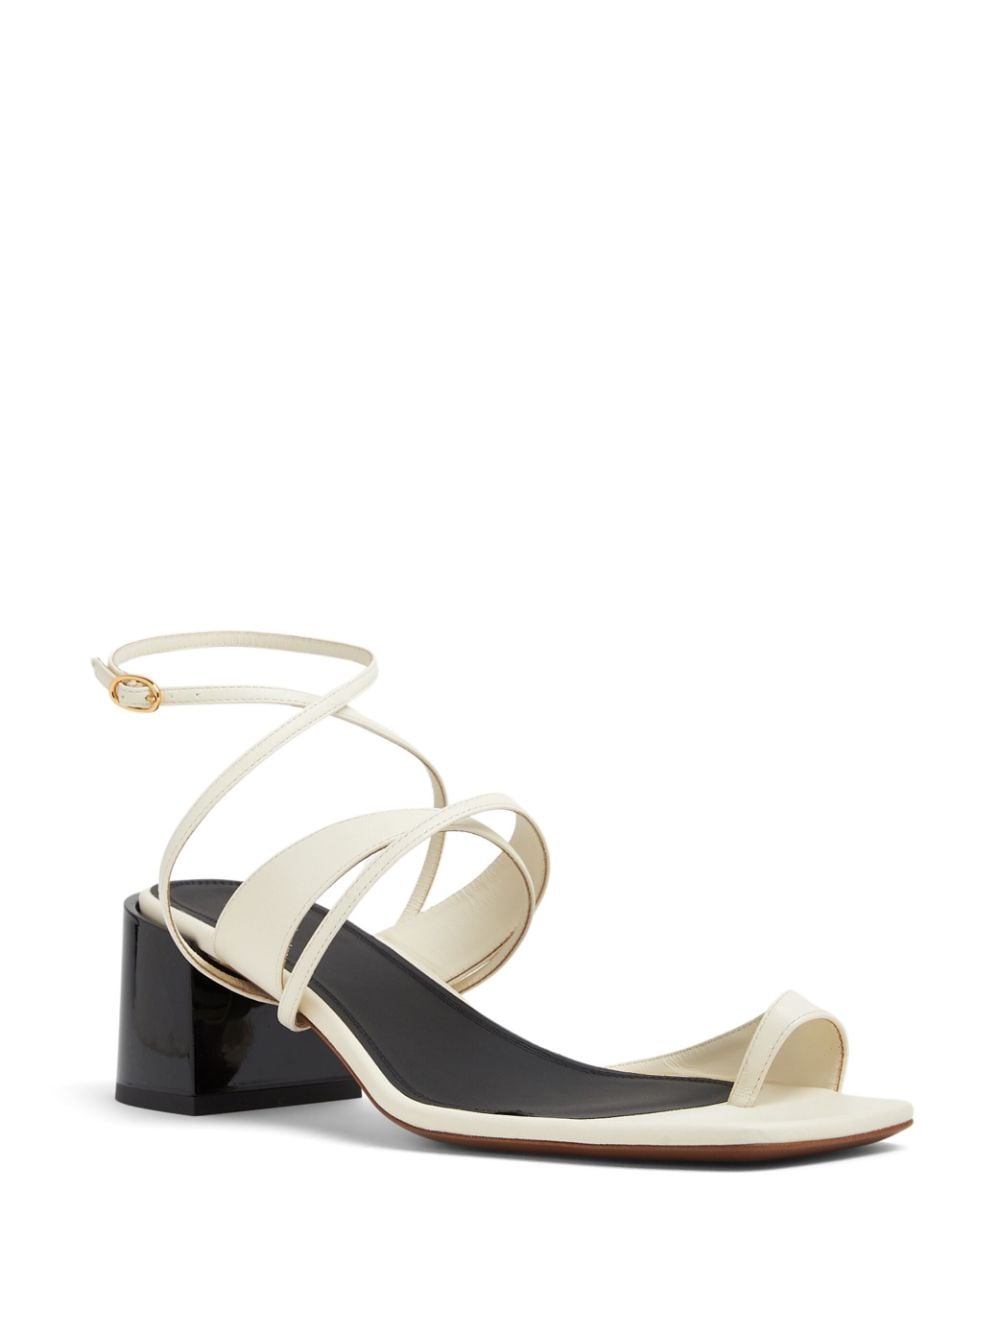 NEOUS Timir 45mm Leather Sandals - Farfetch